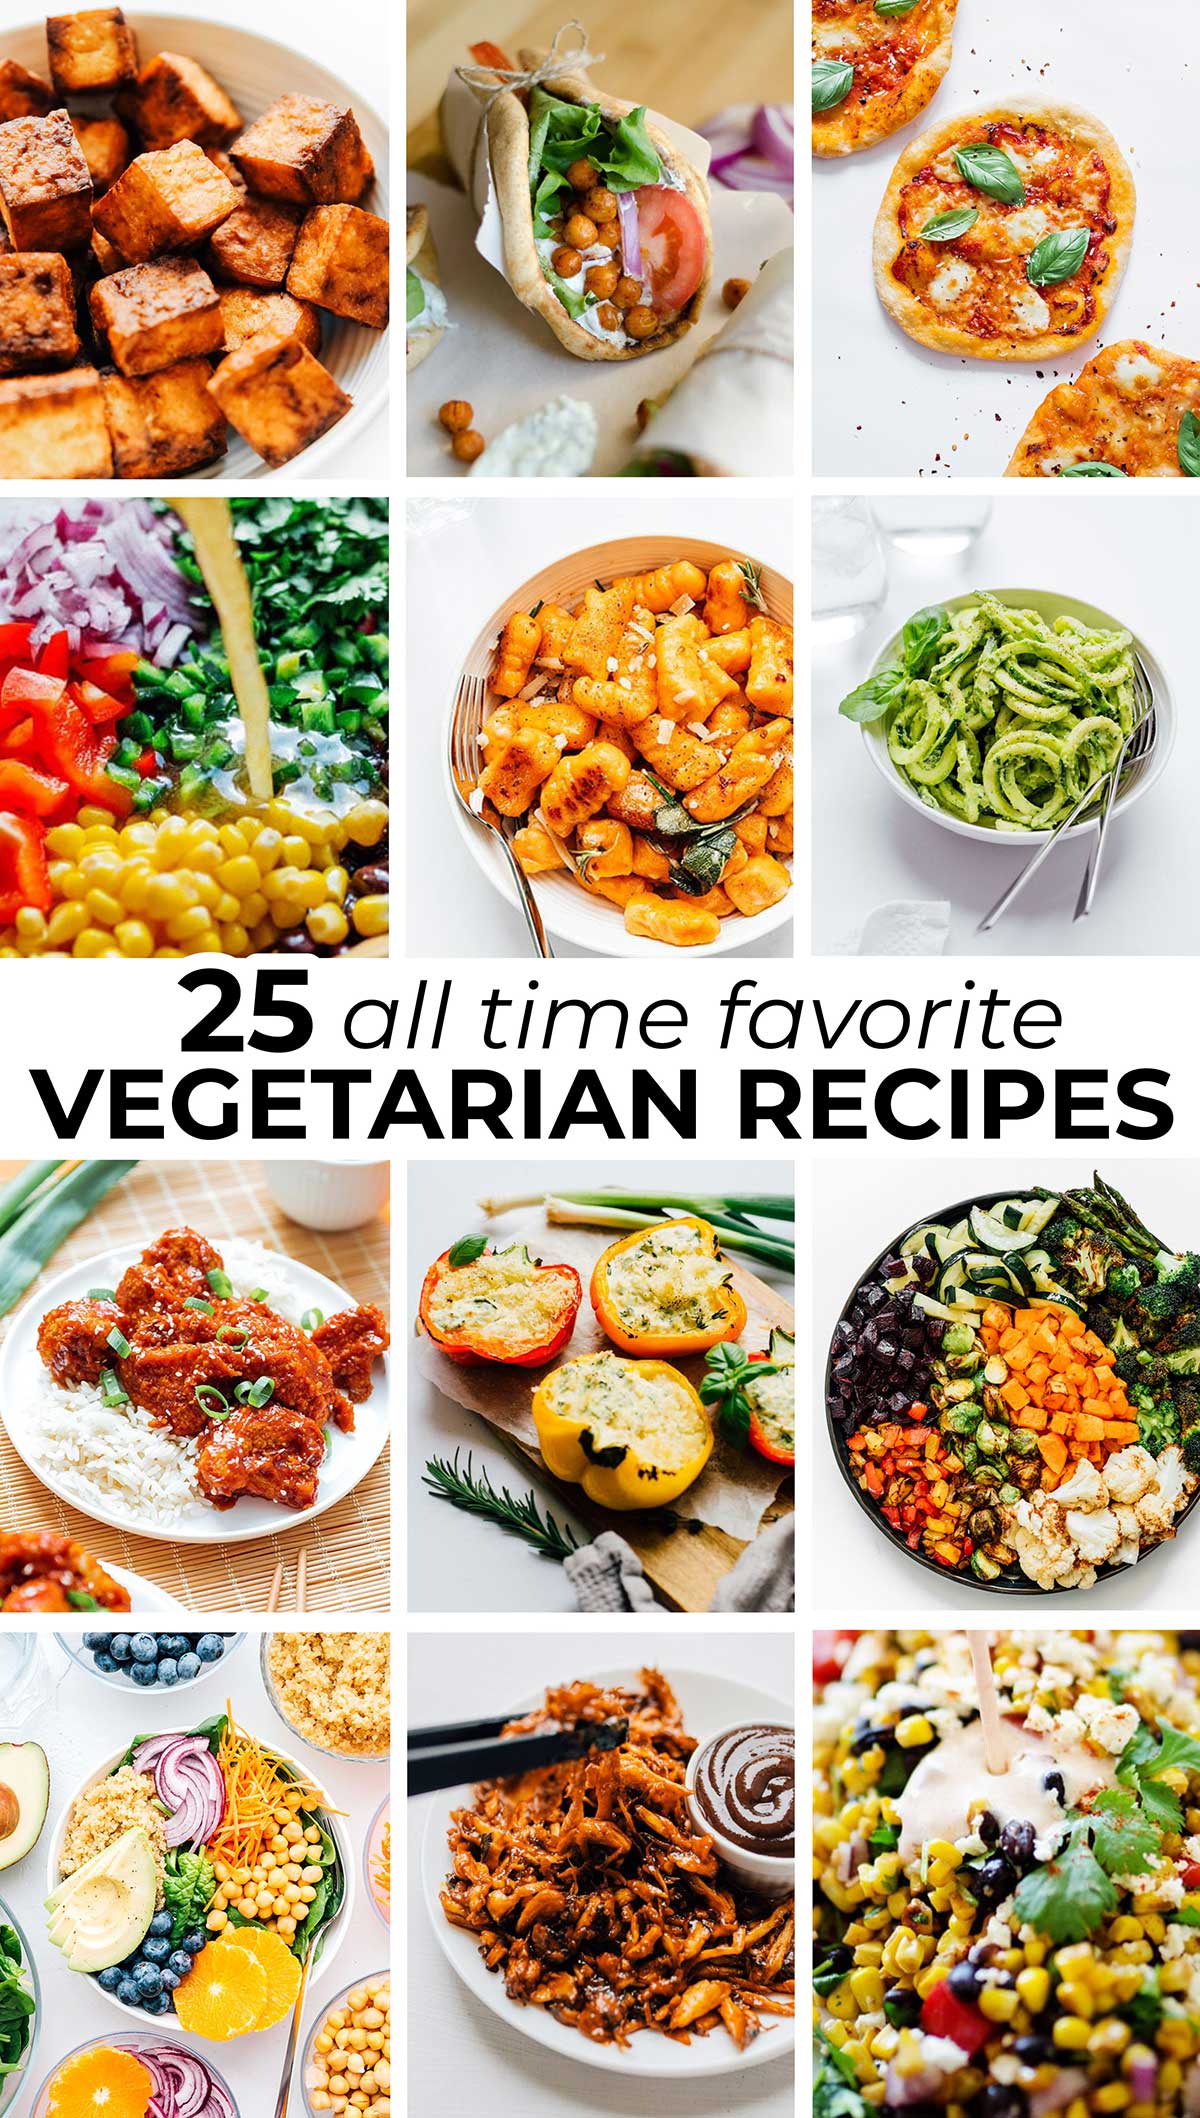 25 All-Time Favorite Vegetarian Recipes | Live Eat Learn